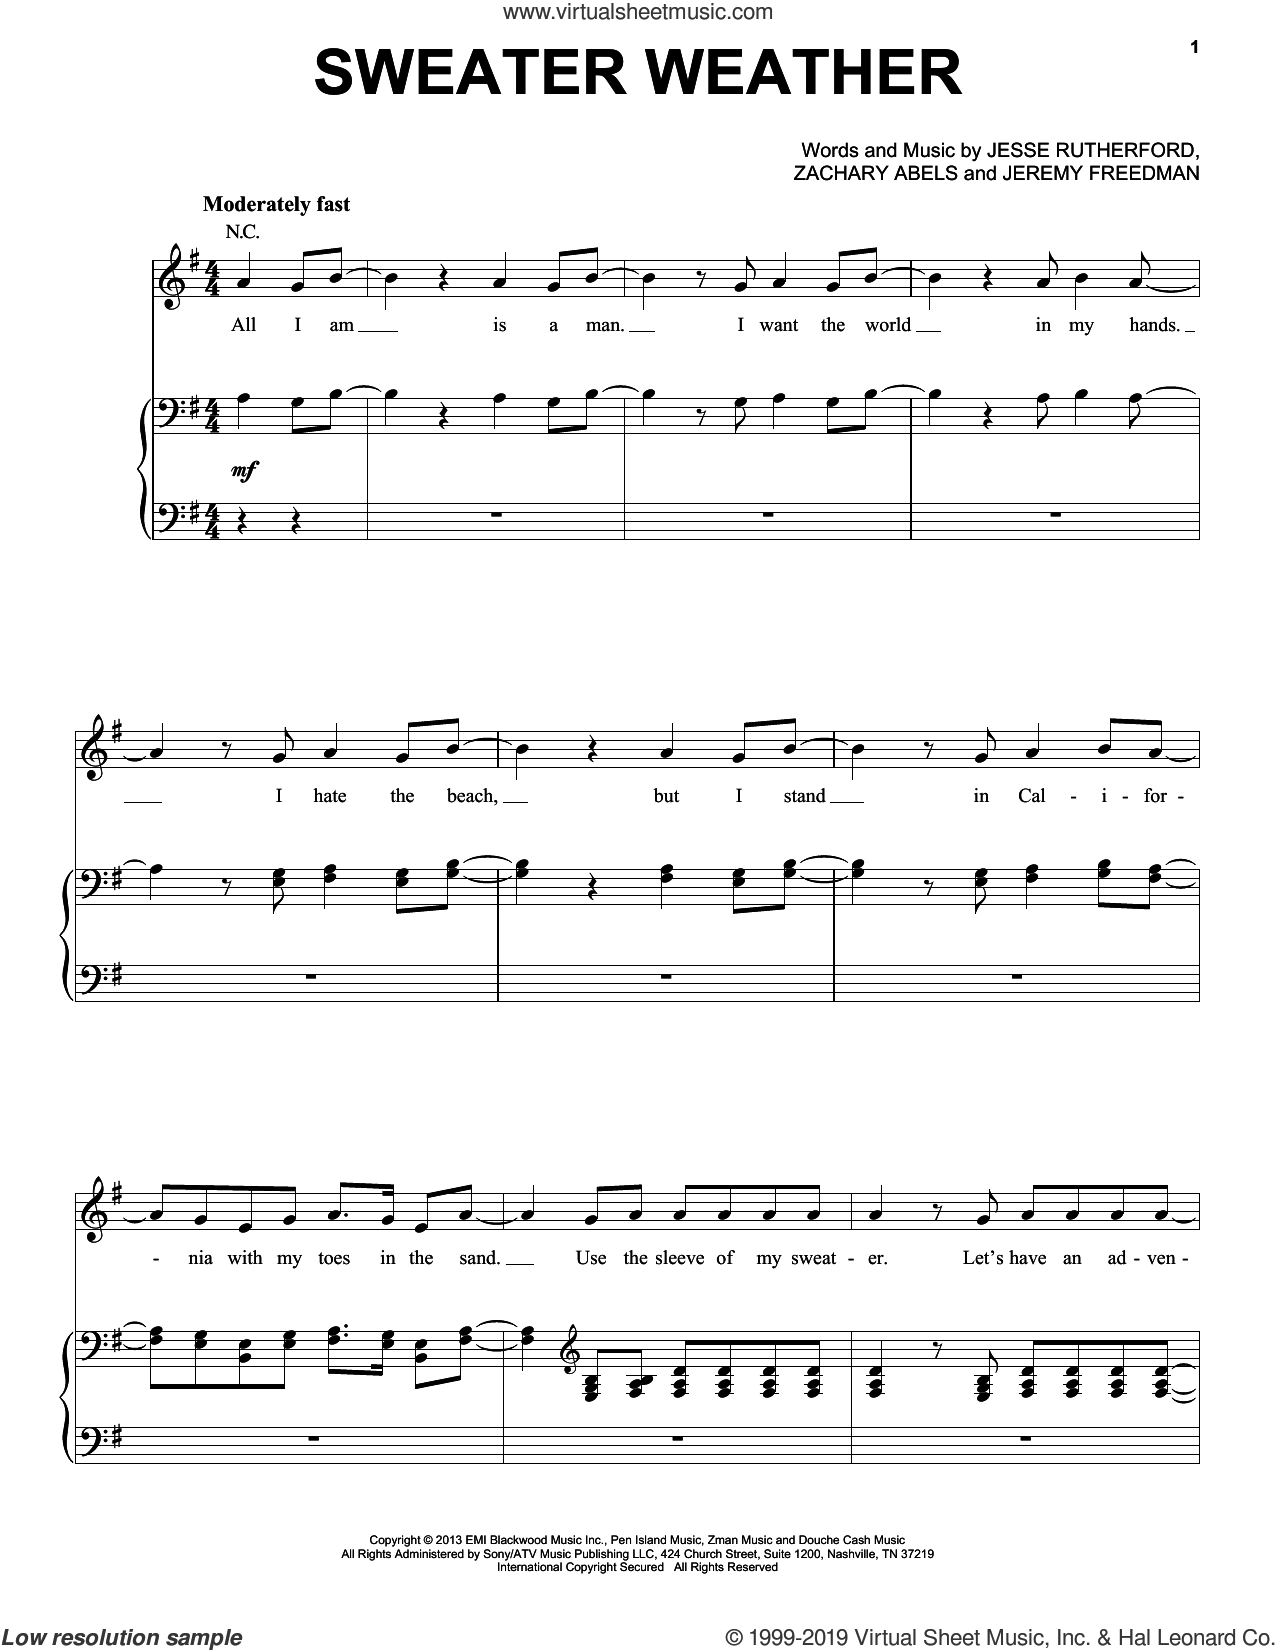 Pentatonix: Sweater Weather sheet music for voice, piano or guitar